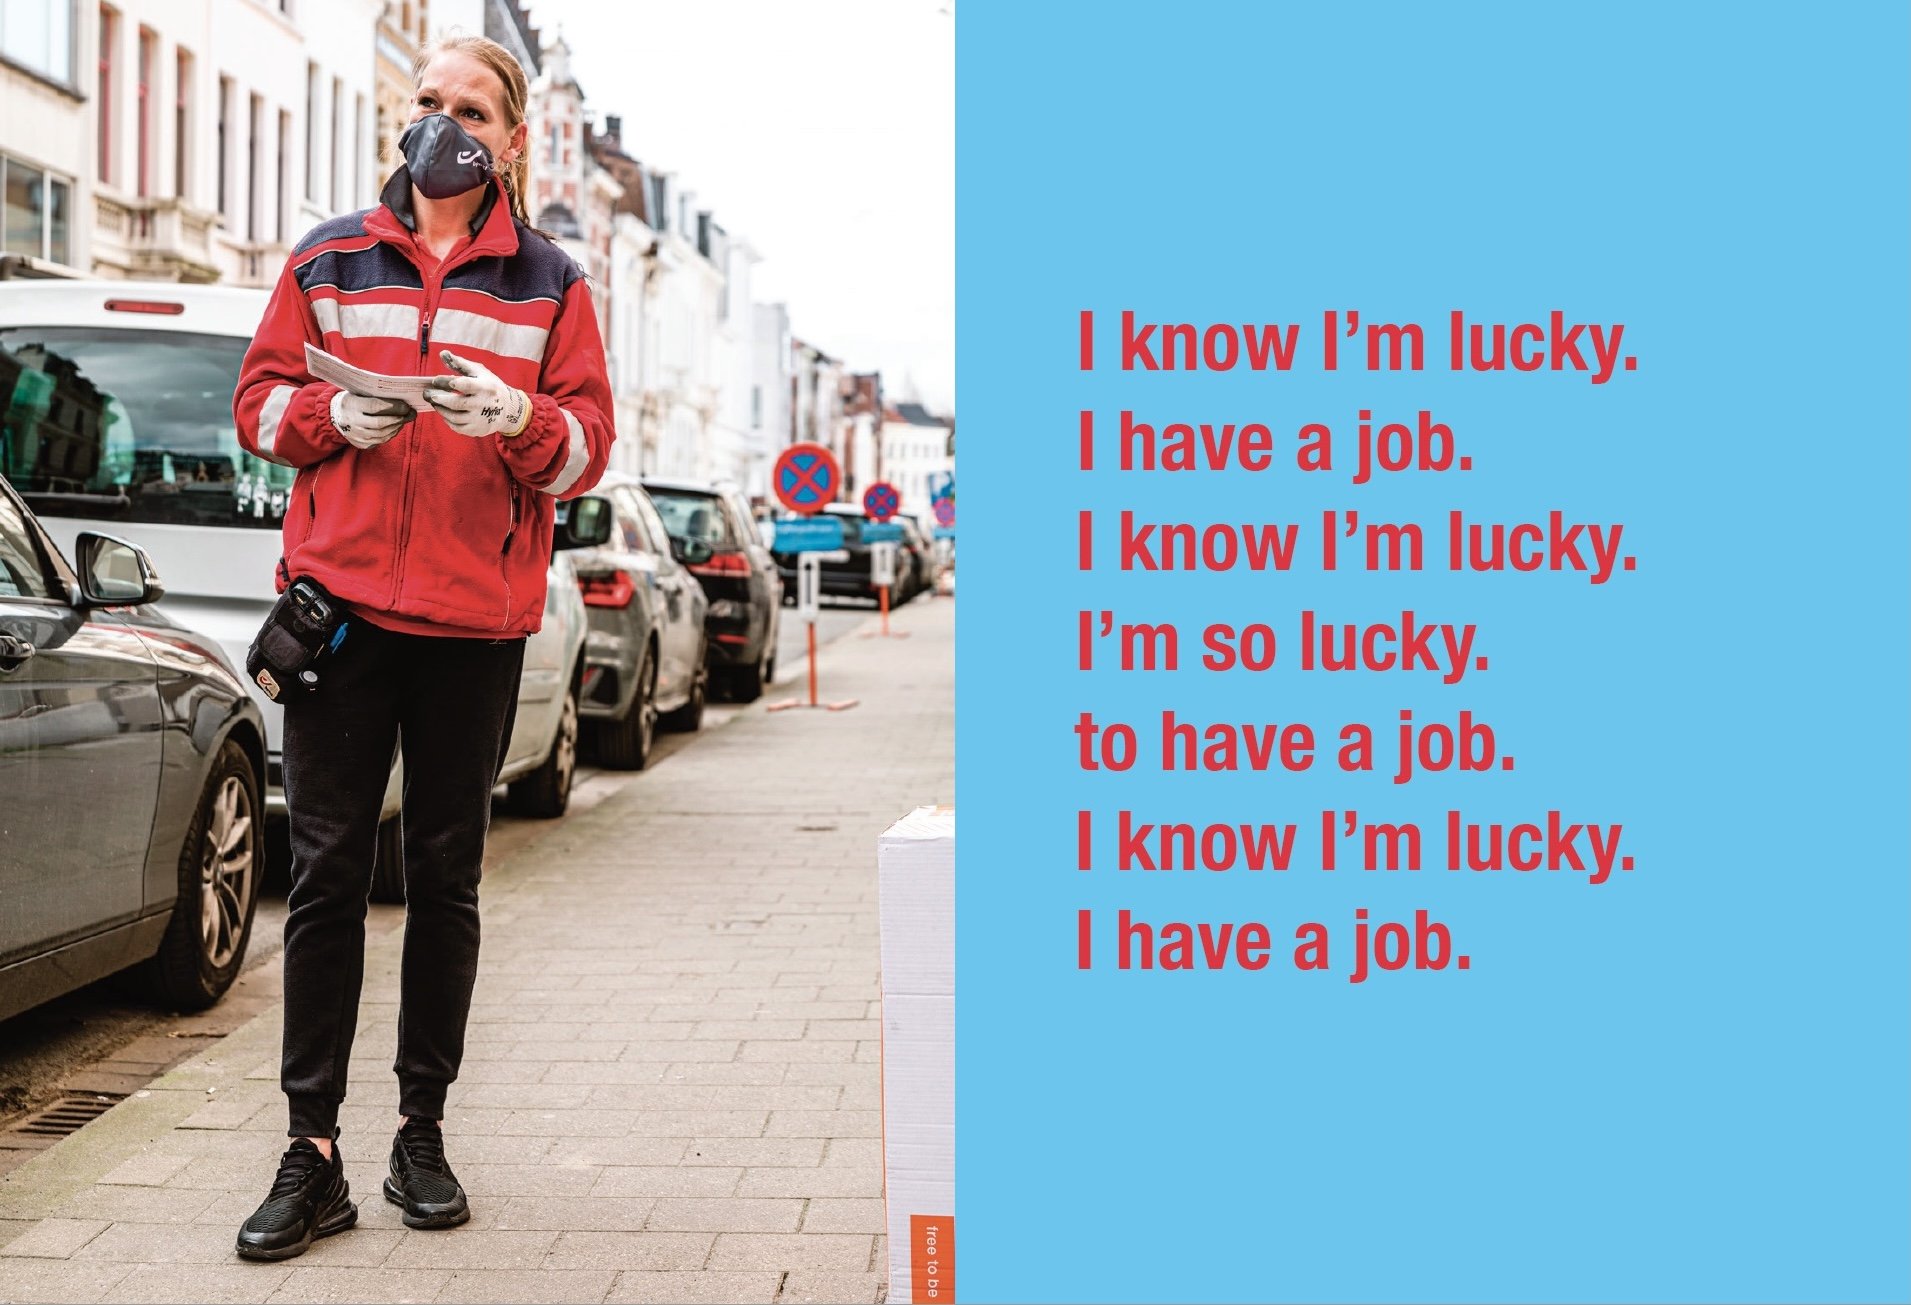   I know I'm lucky. I have a job , 2021 digital print on archival paper 78 x 102 in&nbsp; (198.1 x 259.1 cm) 